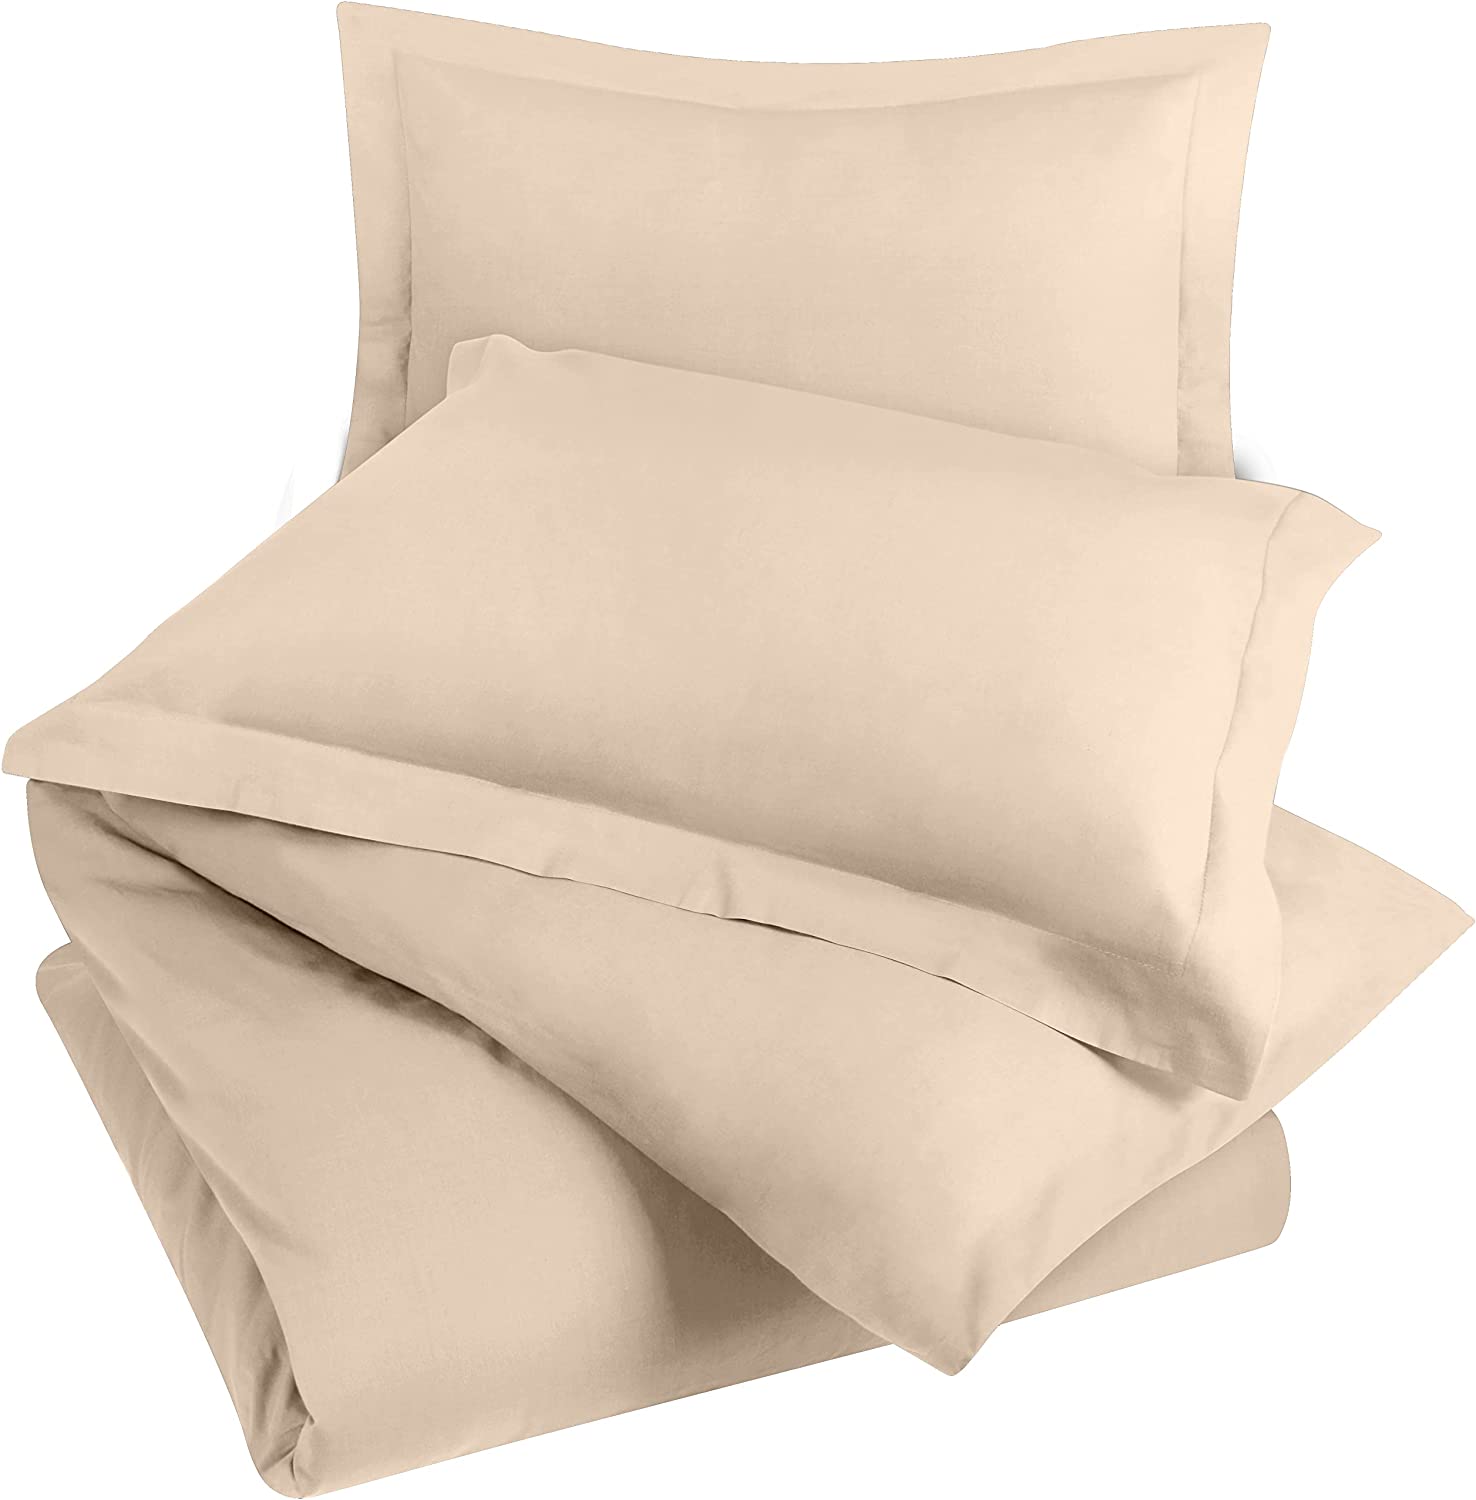 Duvet Cover King Size Set - 1 Duvet Cover with 2 Pillow Shams - 3 Pieces Comforter Cover with Zipper Closure - Ultra Soft Brushed - Beige